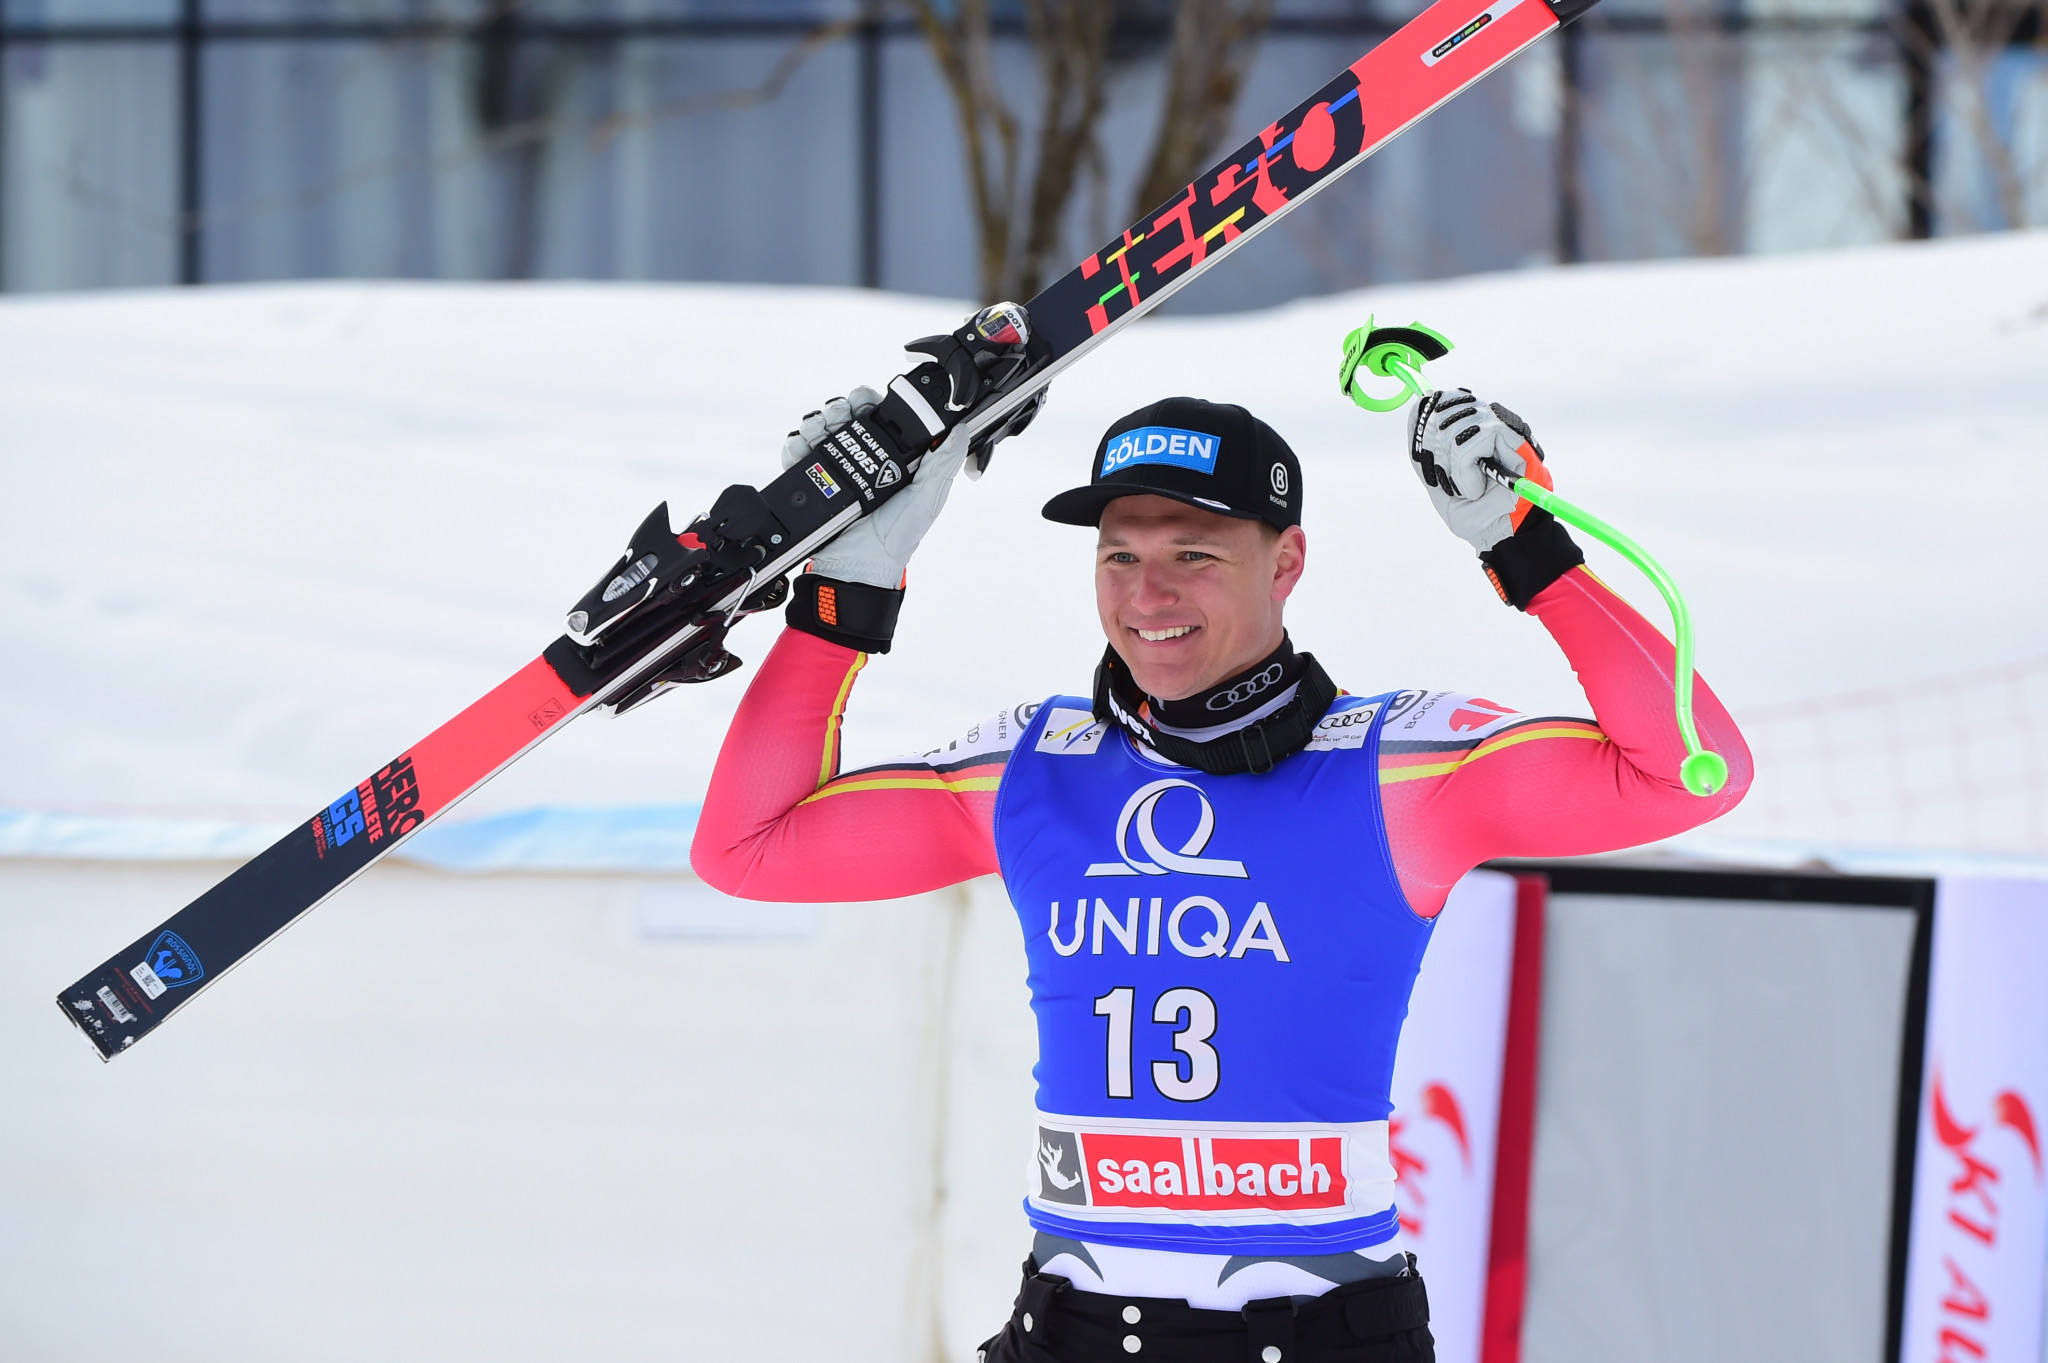 Dressen wins second downhill event in a row on FIS Alpine Ski World Cup tour